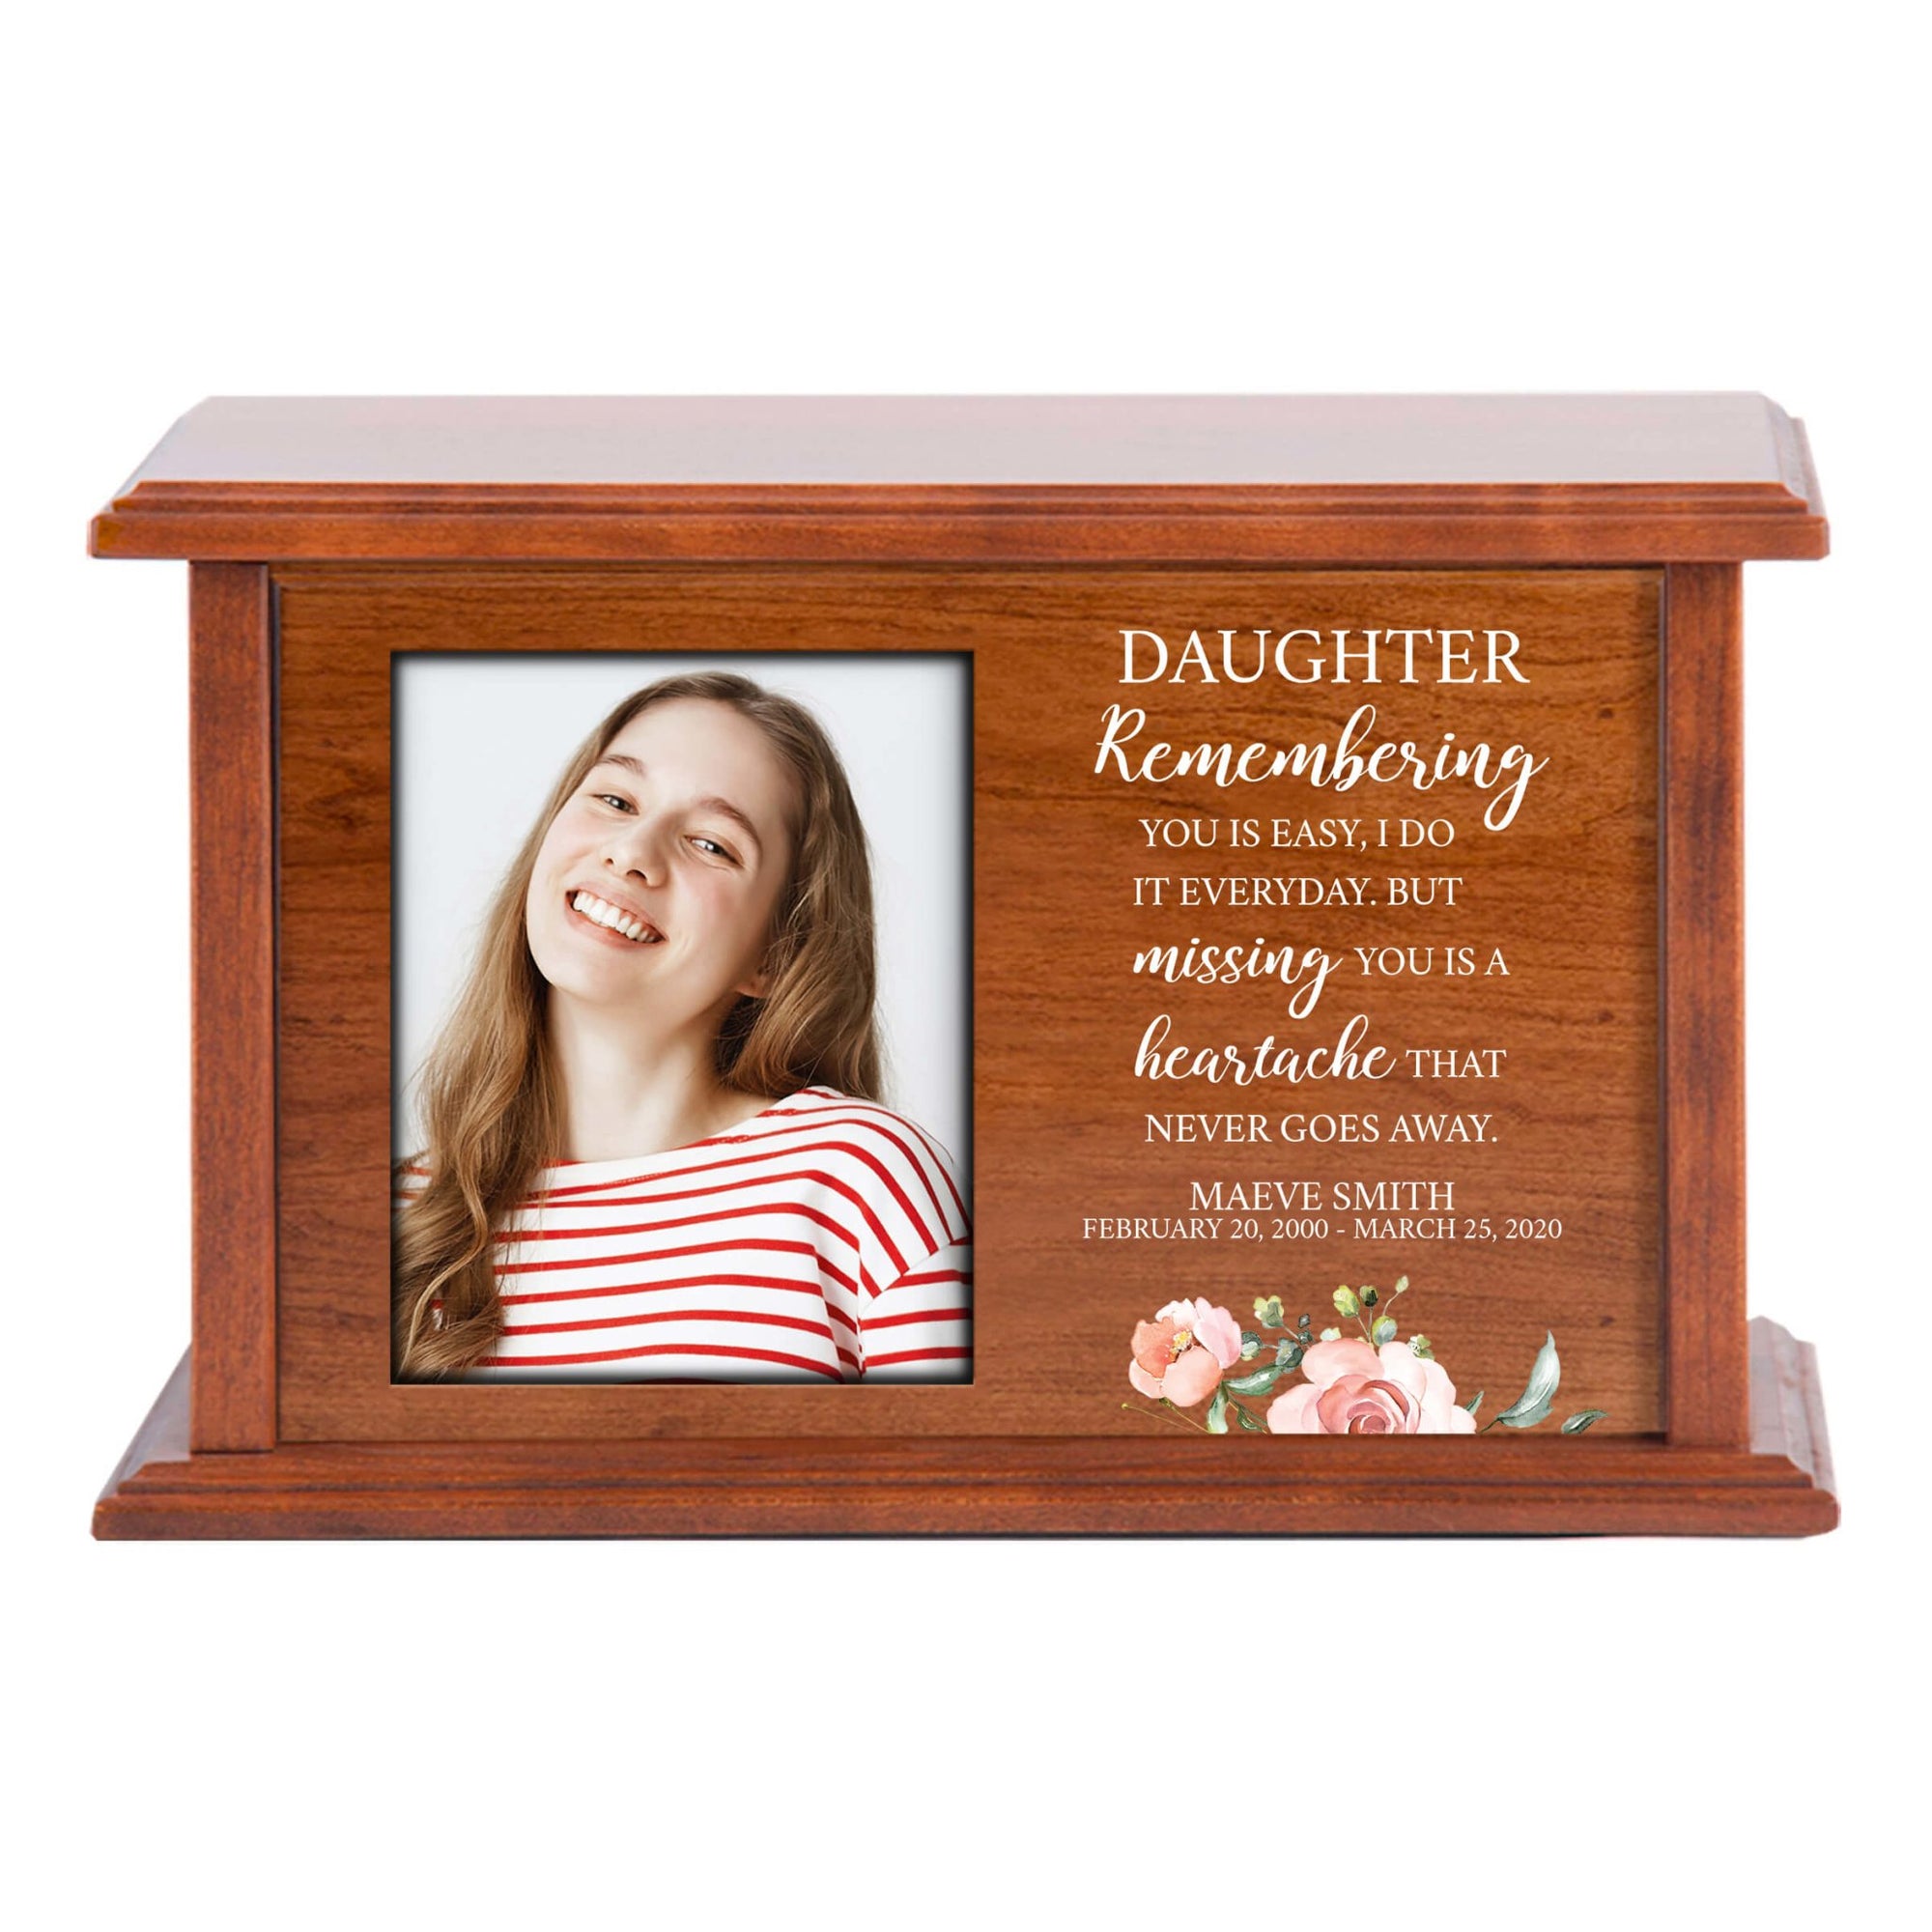 Custom Engraved Photo Cremation Urn - Remembering You Is Easy - LifeSong Milestones